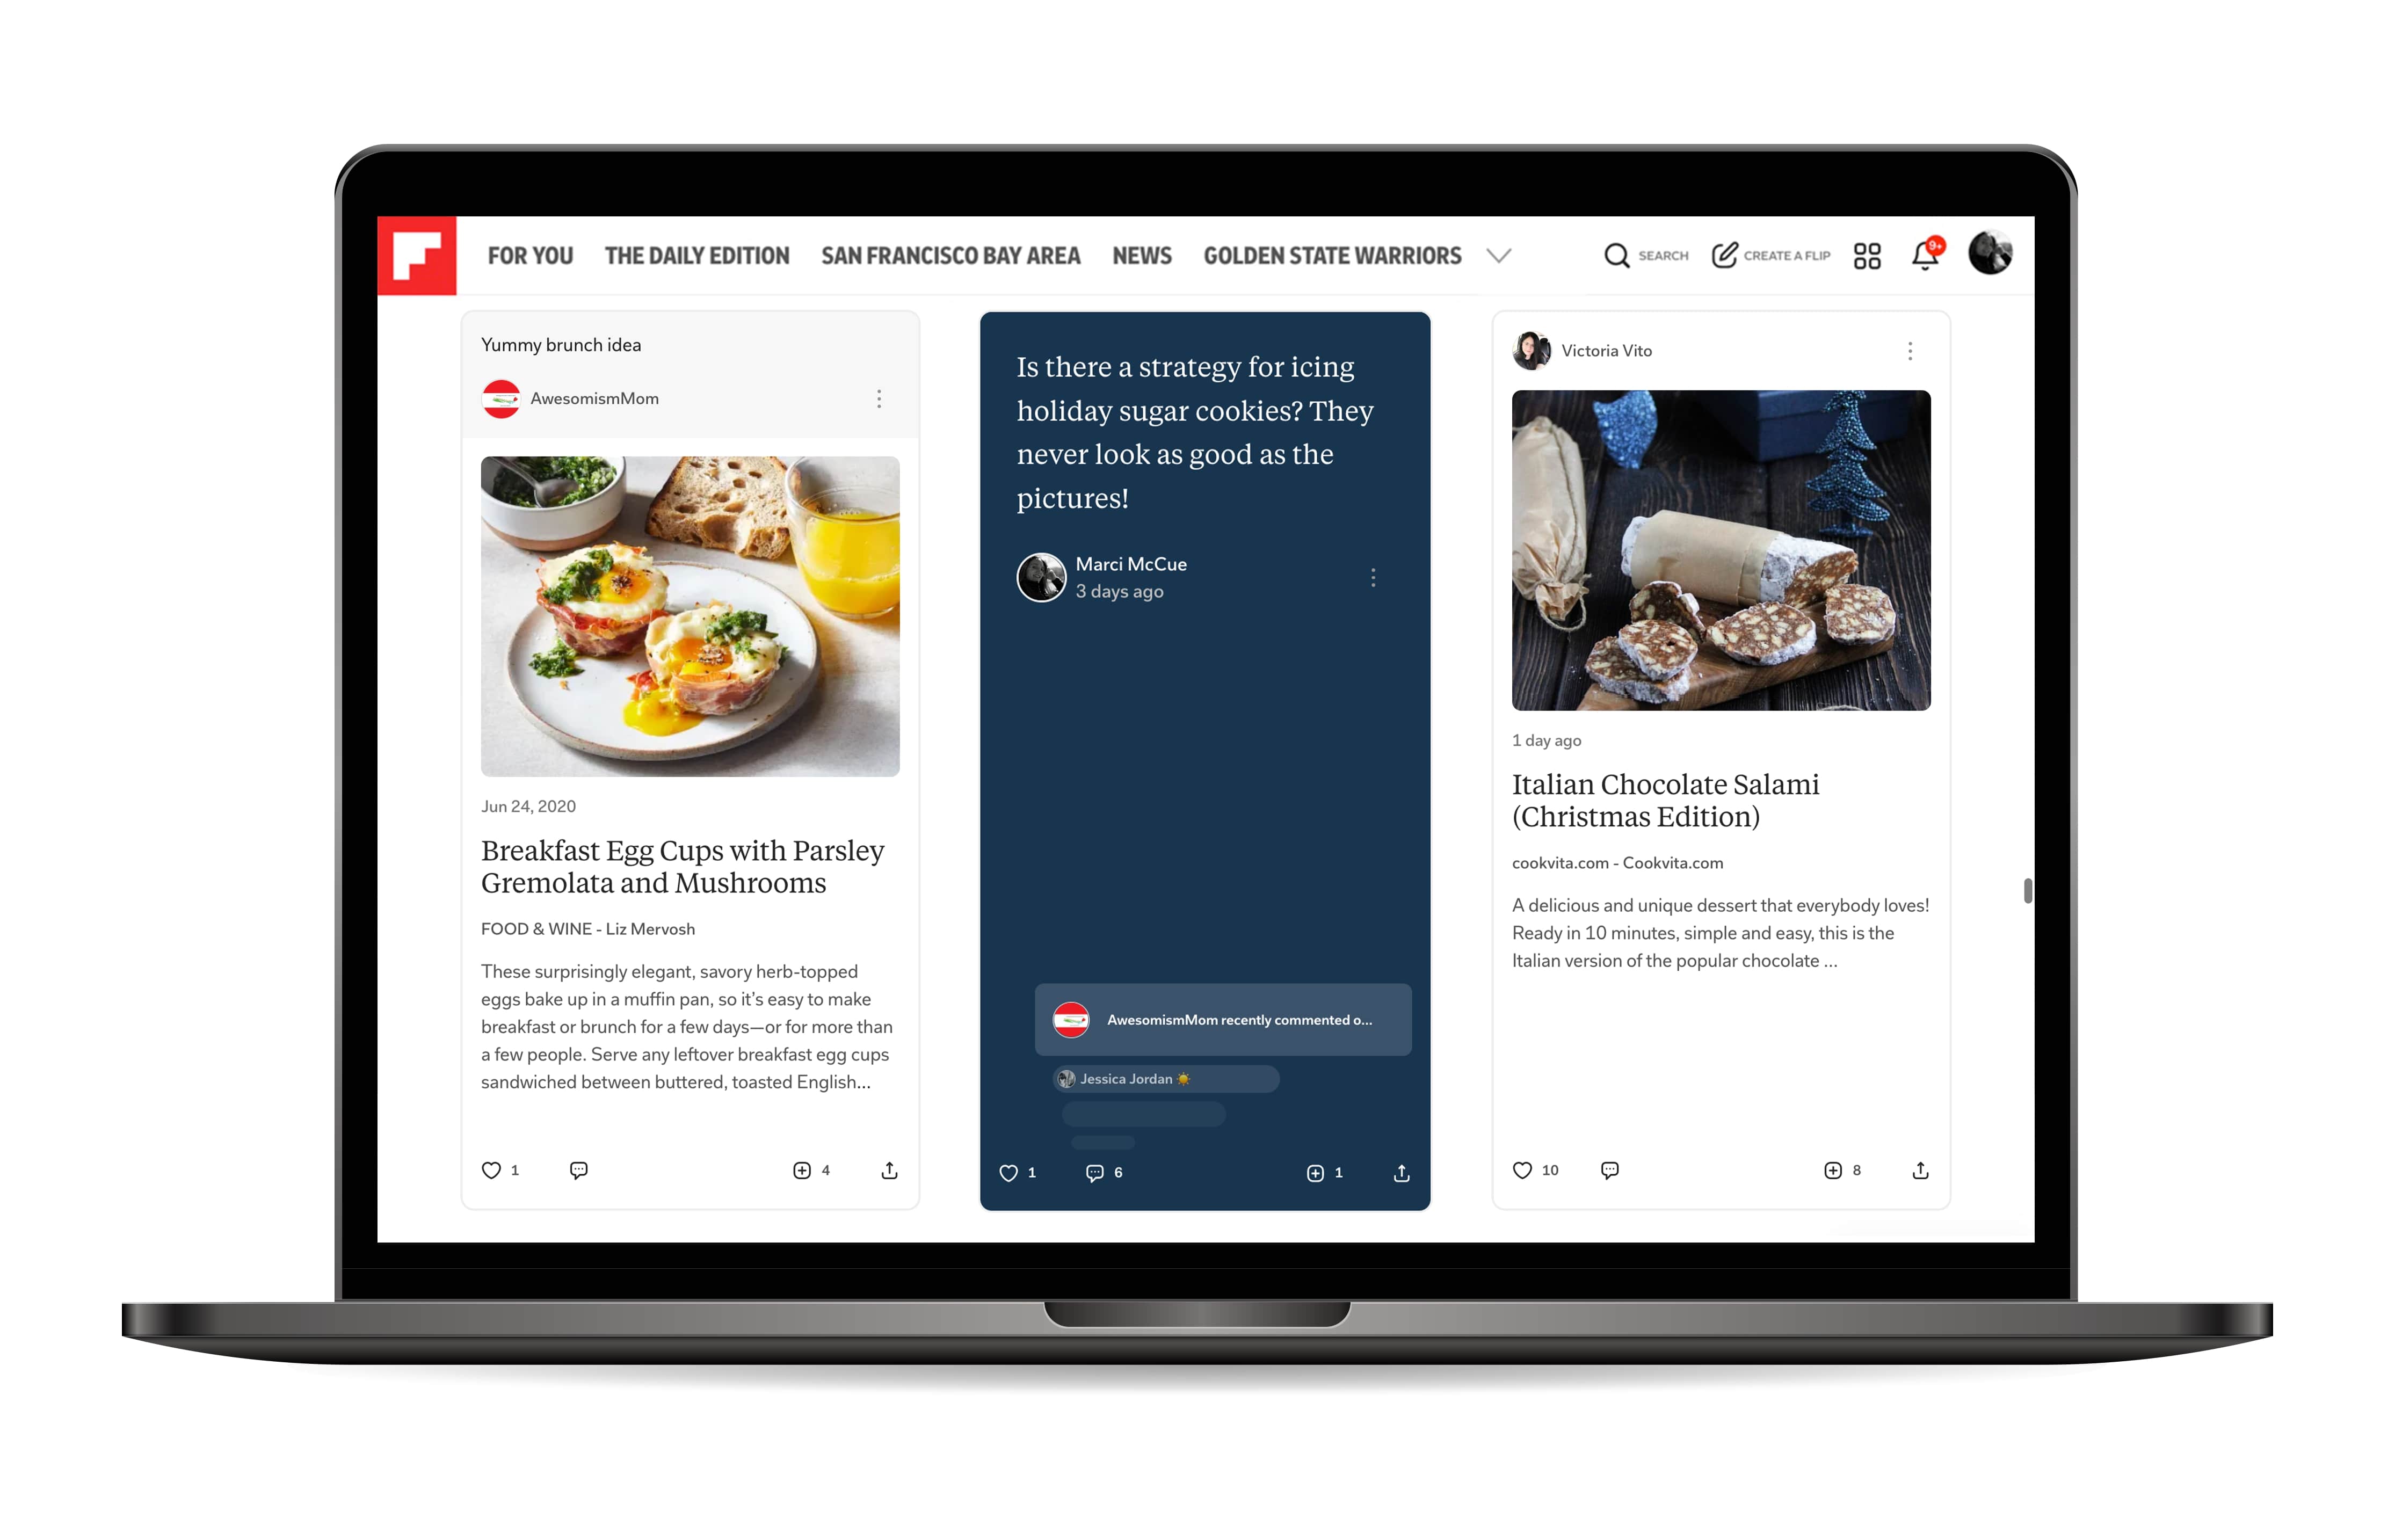 Flipboard’s new Notes feature brings original content and conversation to the app